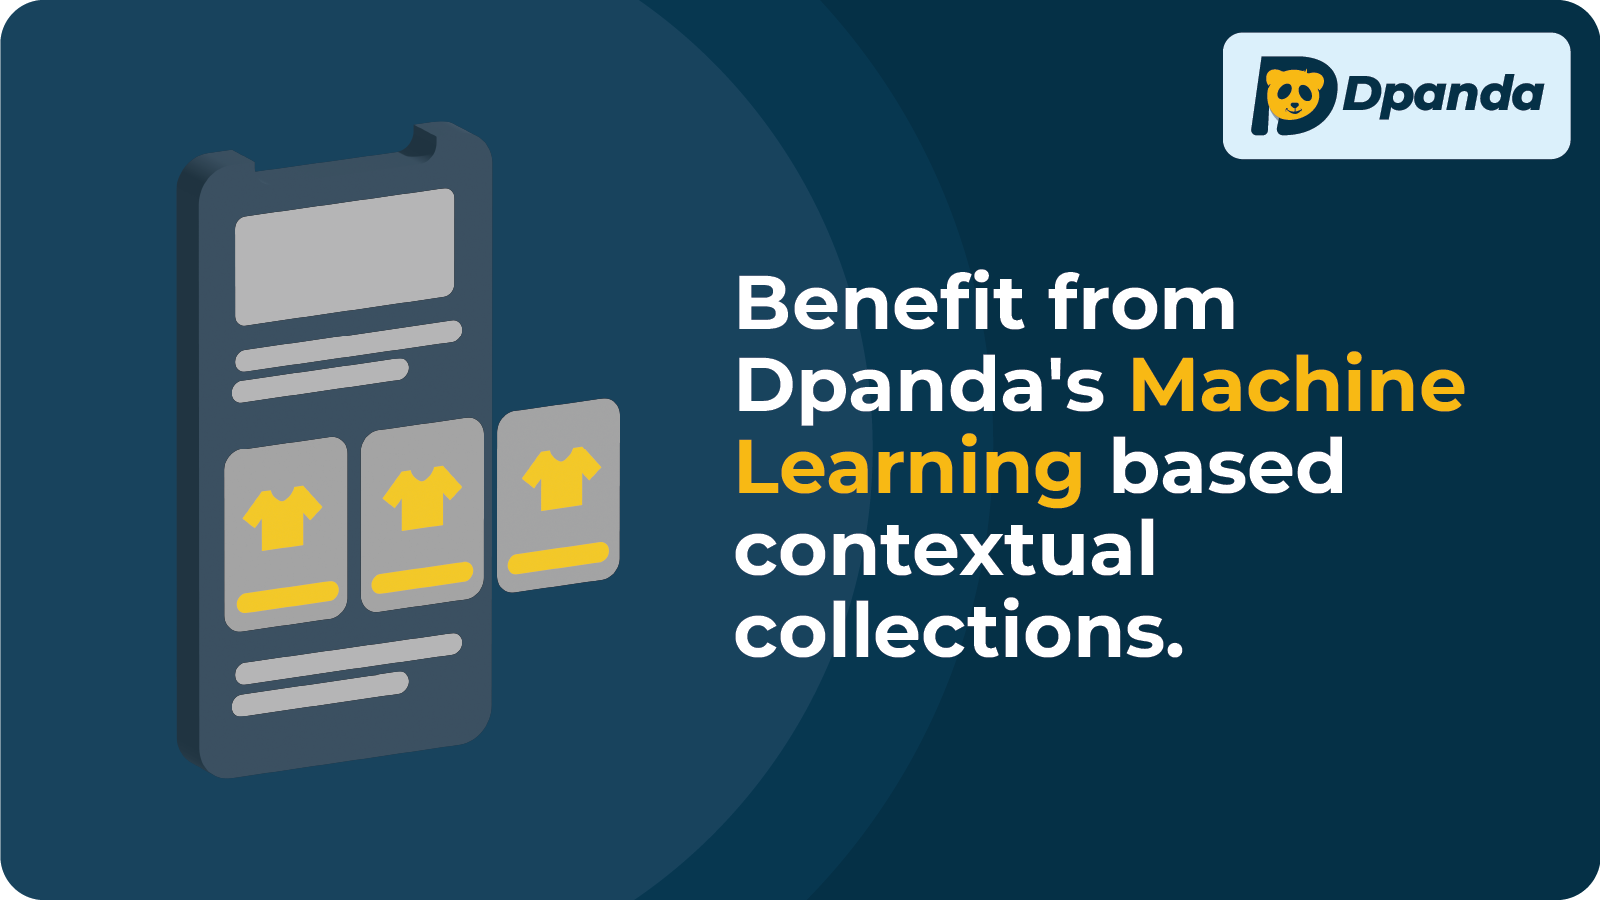 Dpanda offers you near zero hassle selling experience